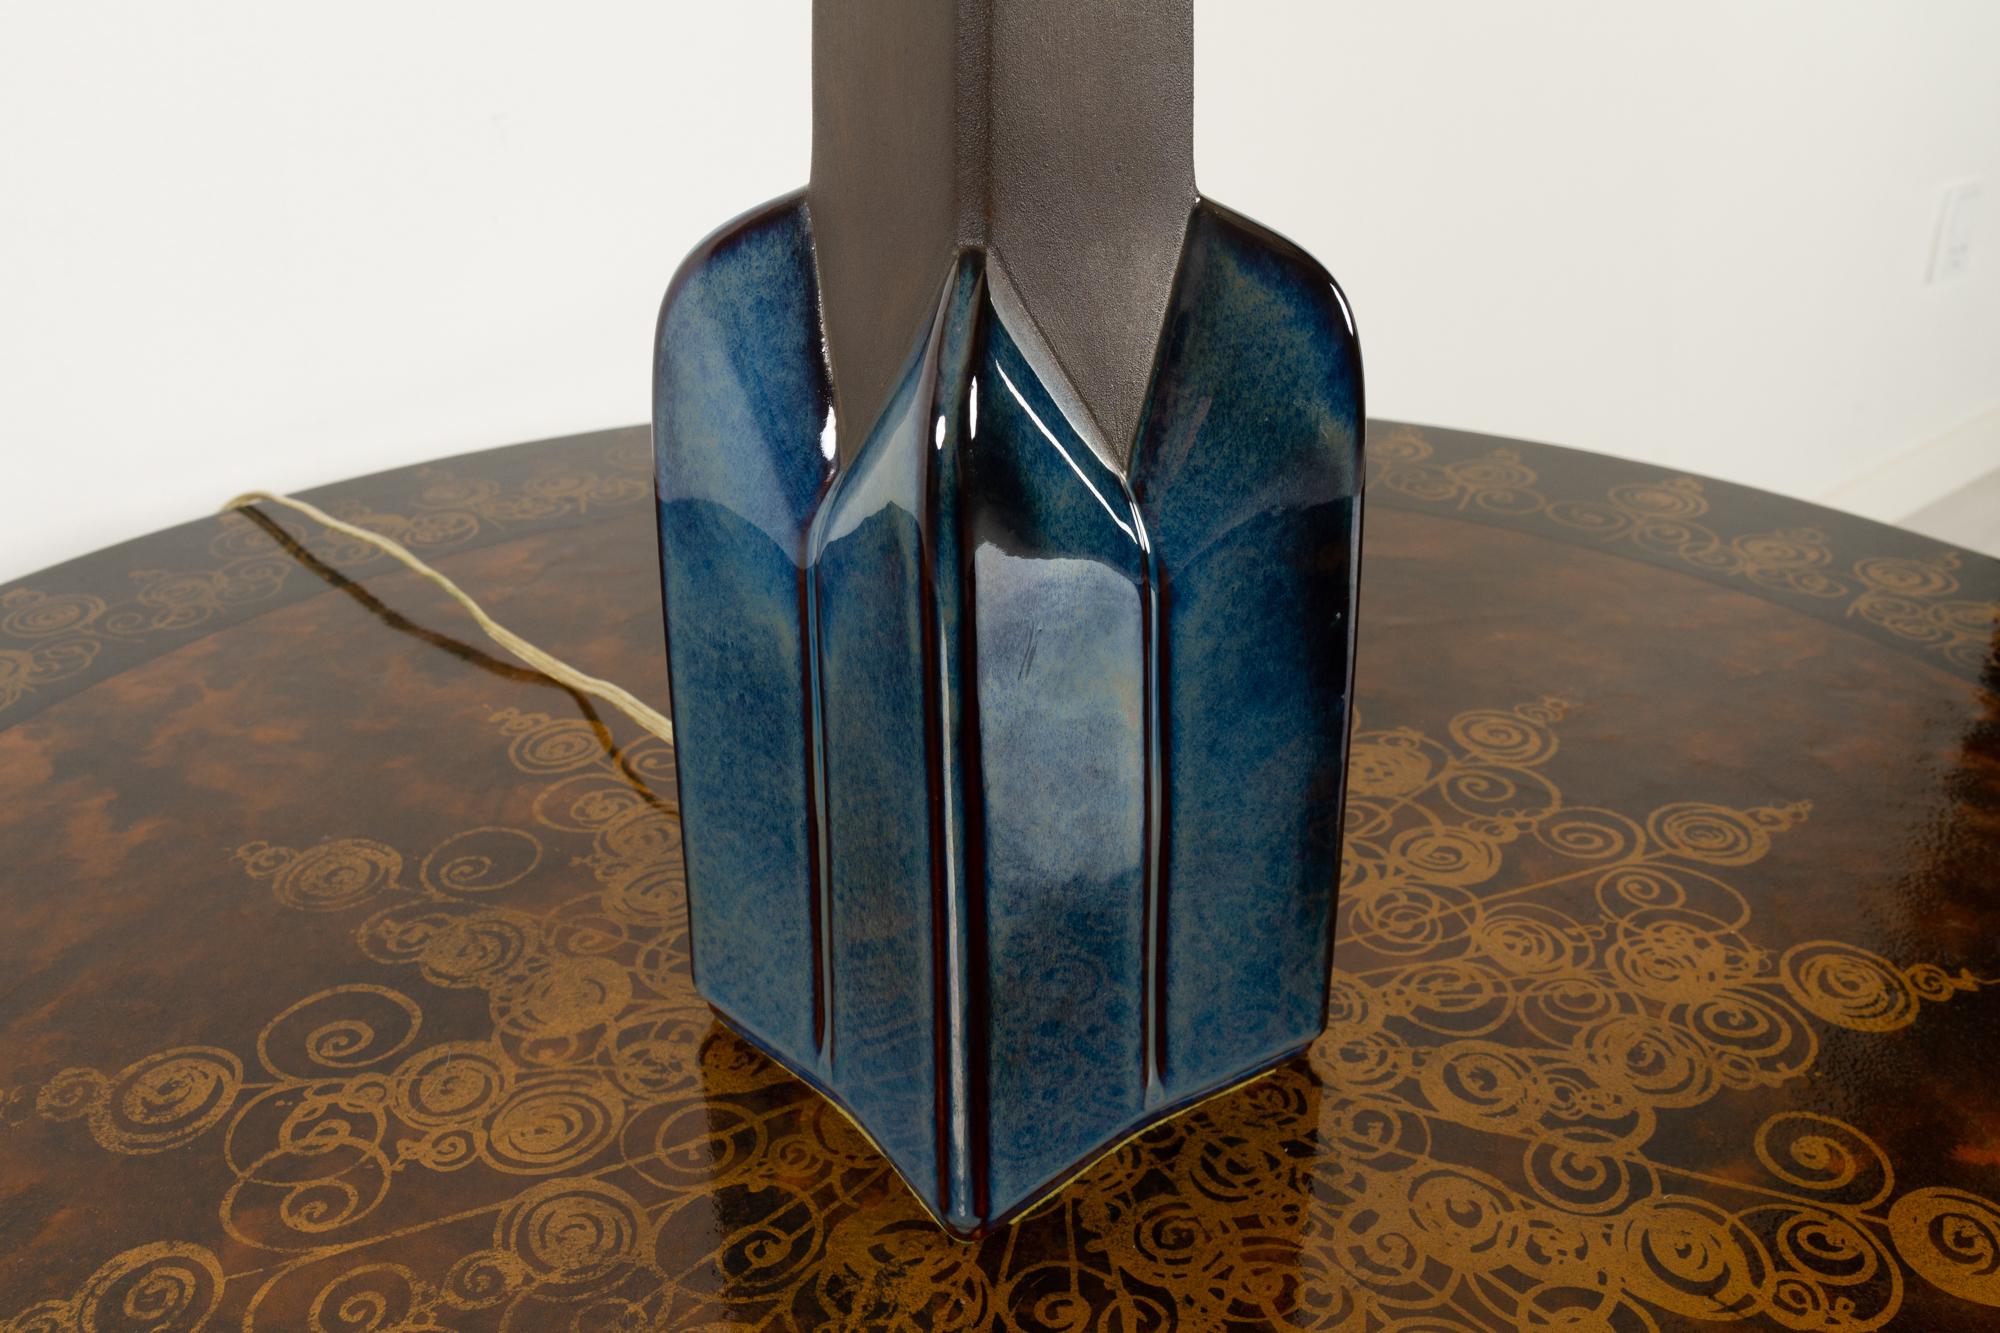 Mid-20th Century Danish Modern Ceramic Table Lamp by Søholm, 1960s